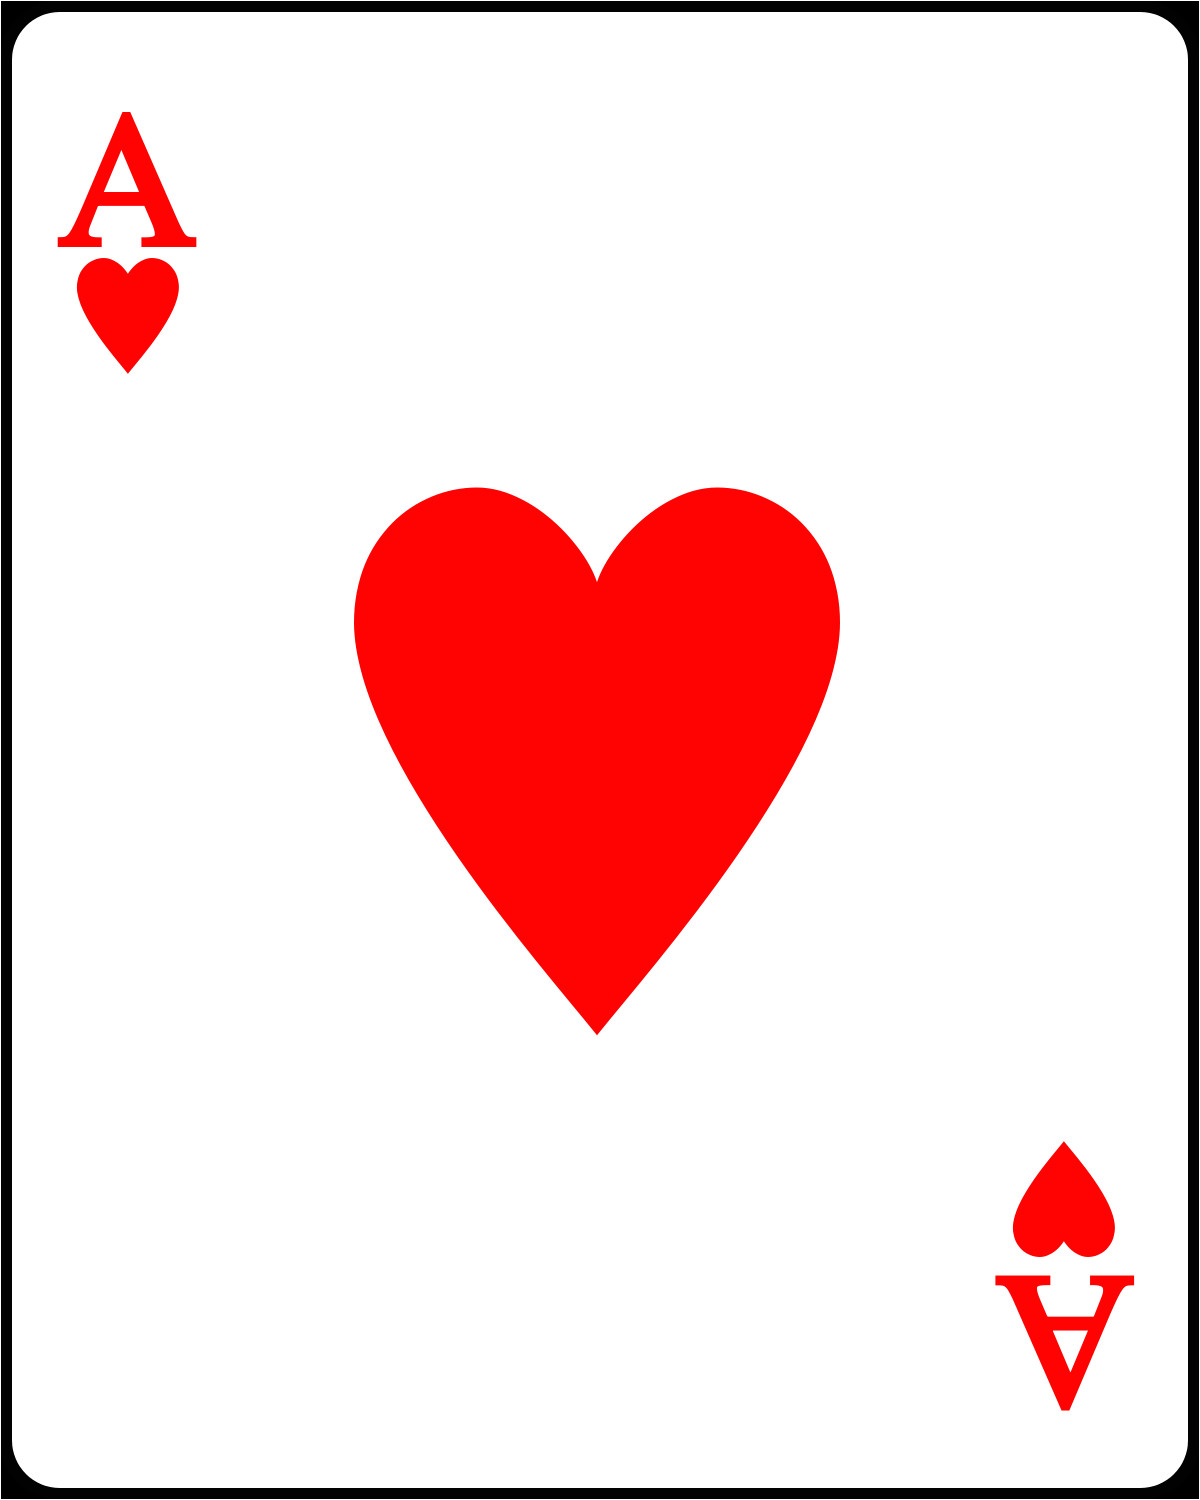 Queen Of Hearts Blank Card Template Image Result for Playing Card Template Ace Hearts Playing